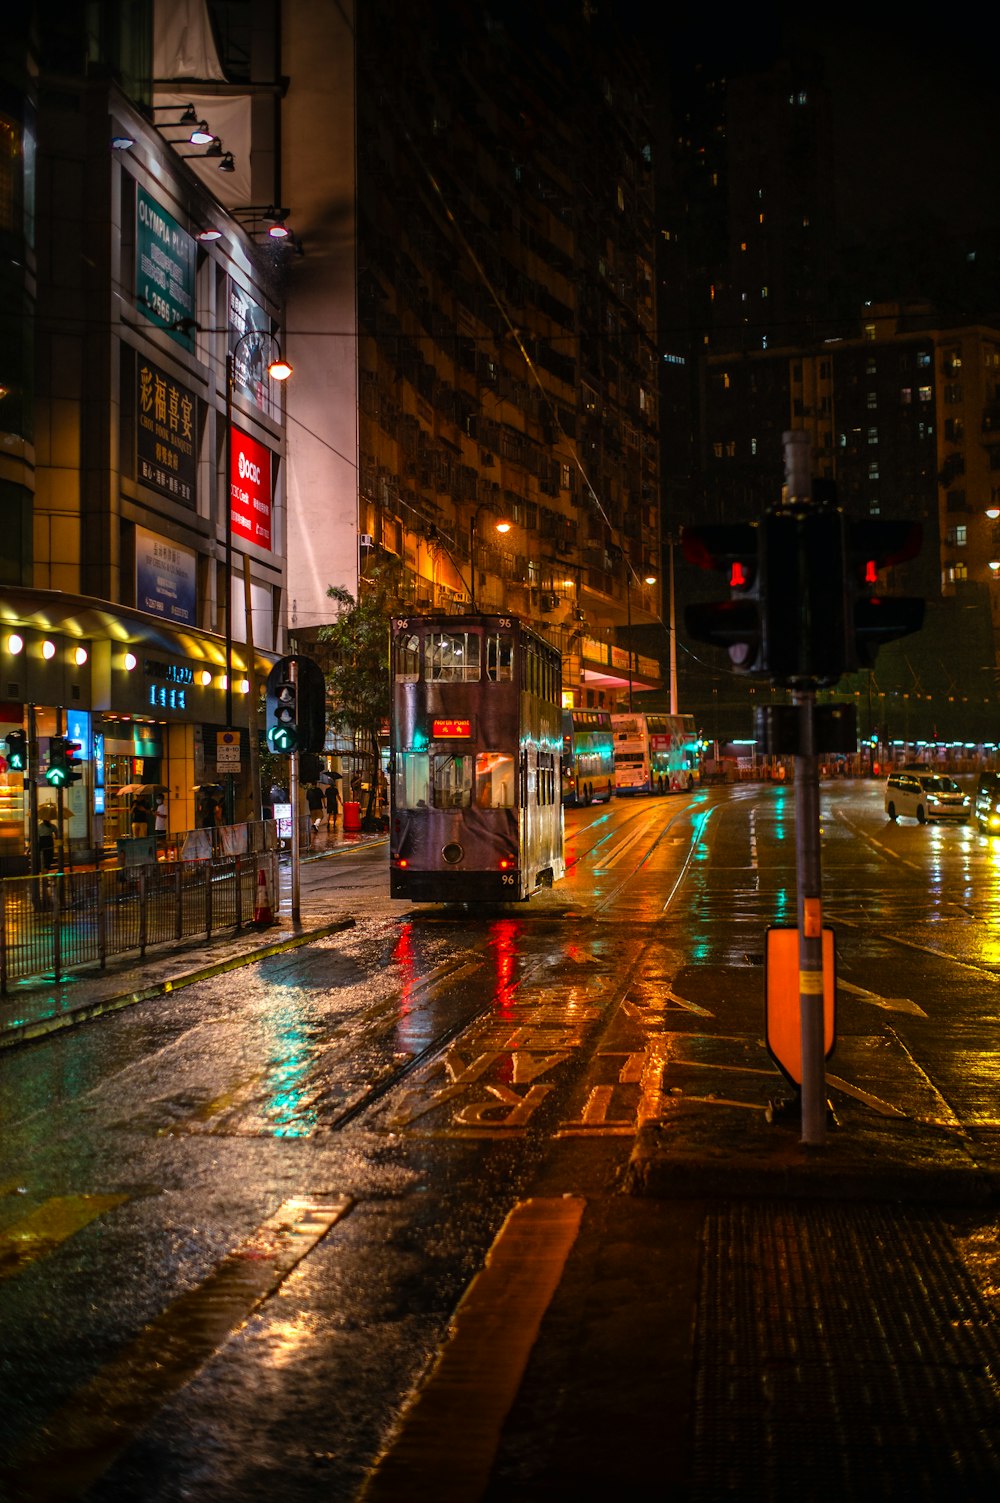 a city street at night with traffic lights